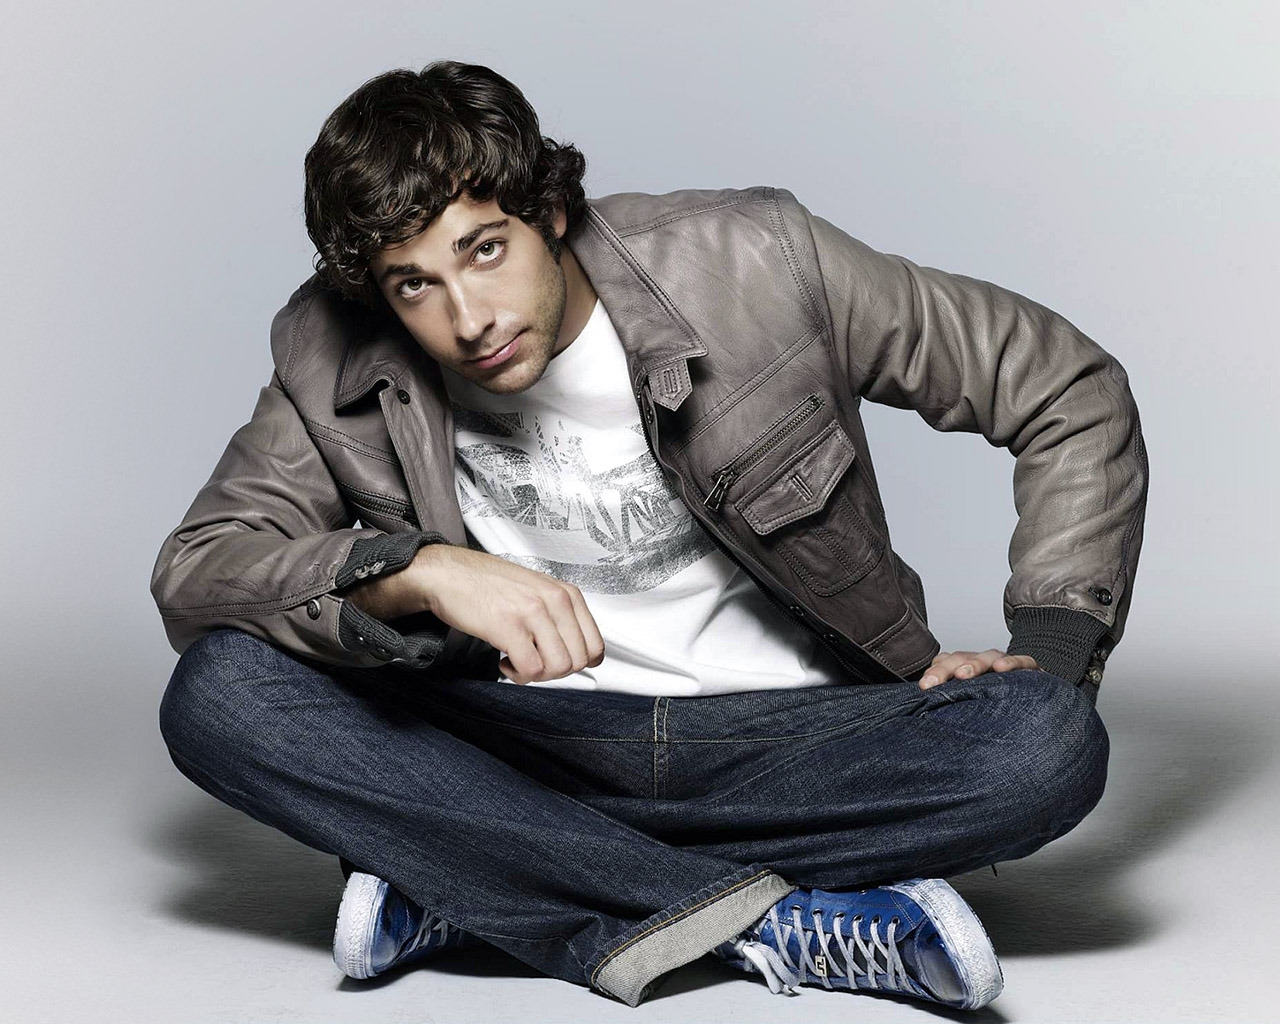 Zachary Levi Looking up for 1280 x 1024 resolution